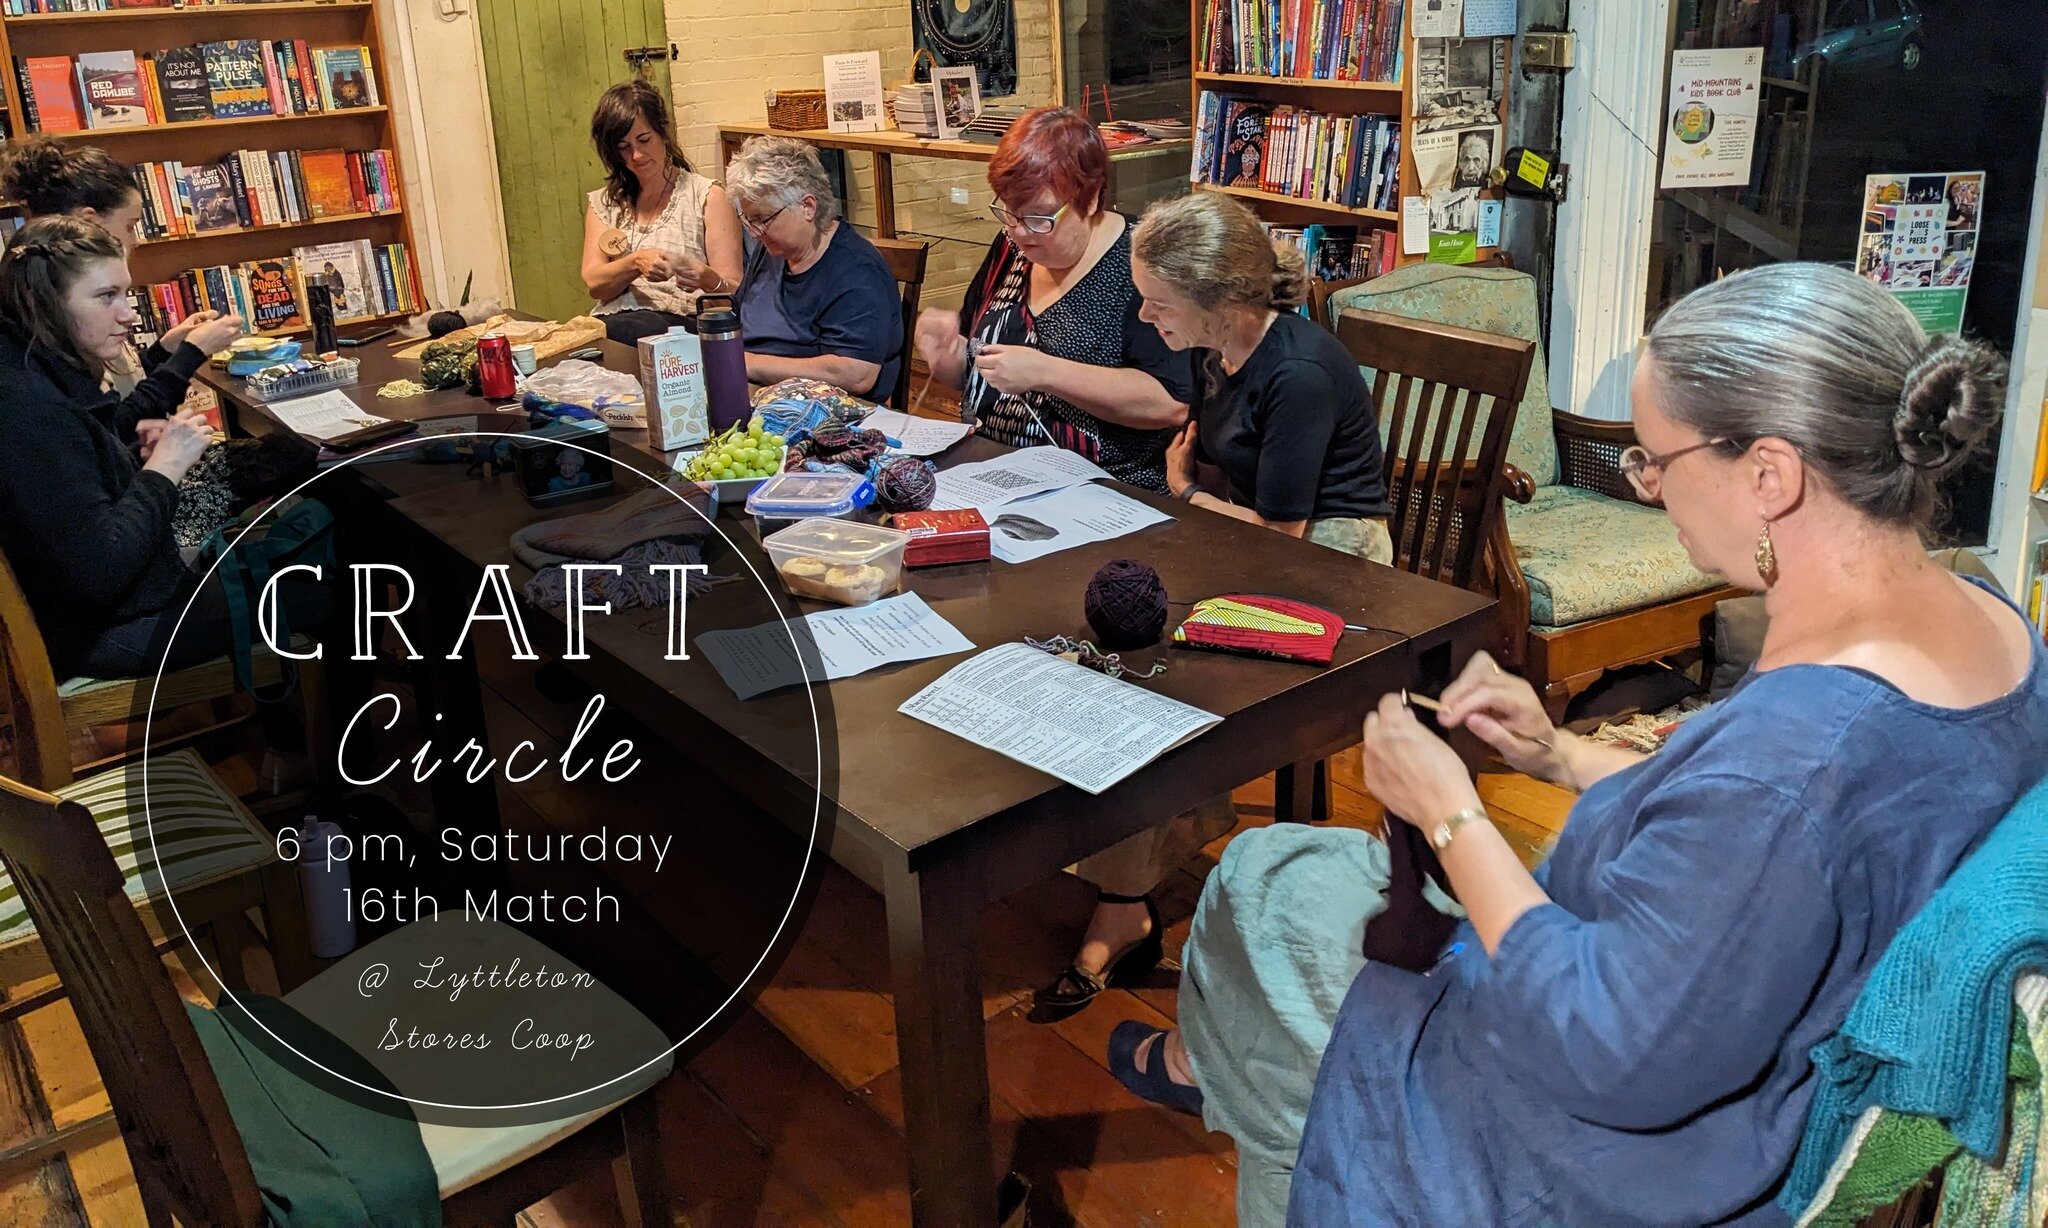 Join us this Saturday (and the 3rd Saturday of each month), all crafts and crafters welcome! We'll be in the cottage at the back of the bookstore this month.

Find out more www.lyttletonstores.com.au/craft-circle